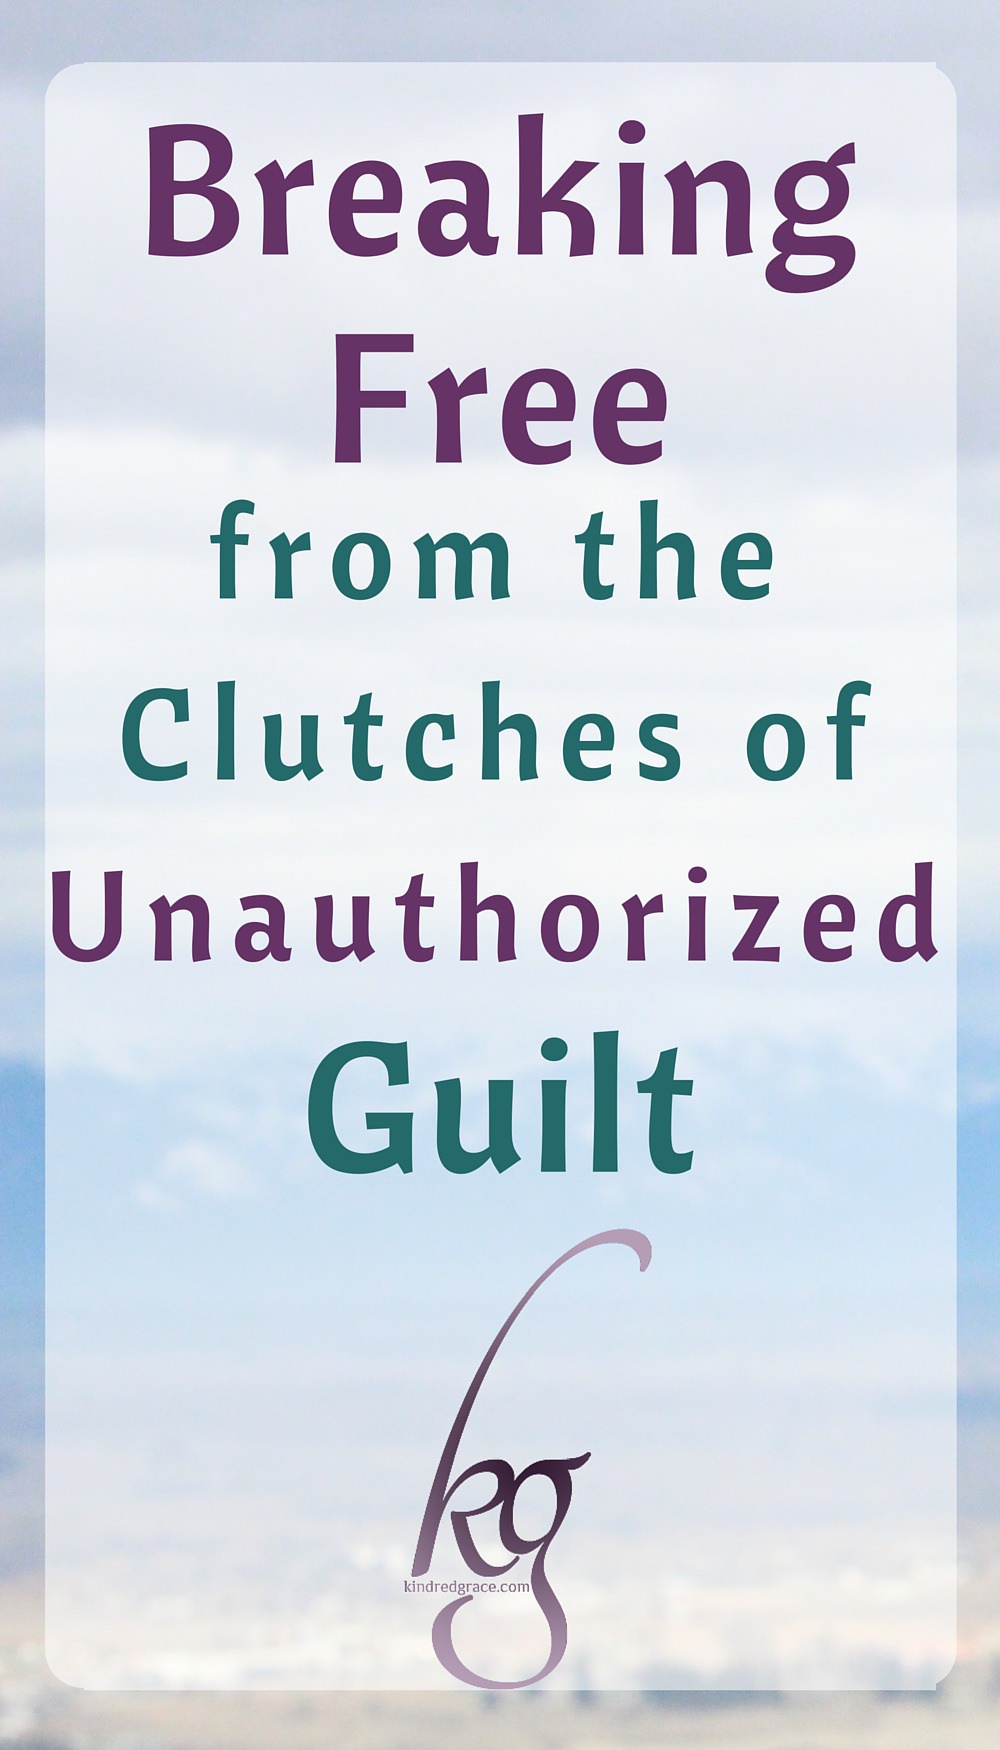 Becoming blameless means understanding where guilt and blame are legitimate and where they have been imposed by unauthorized sources. via @KindredGrace